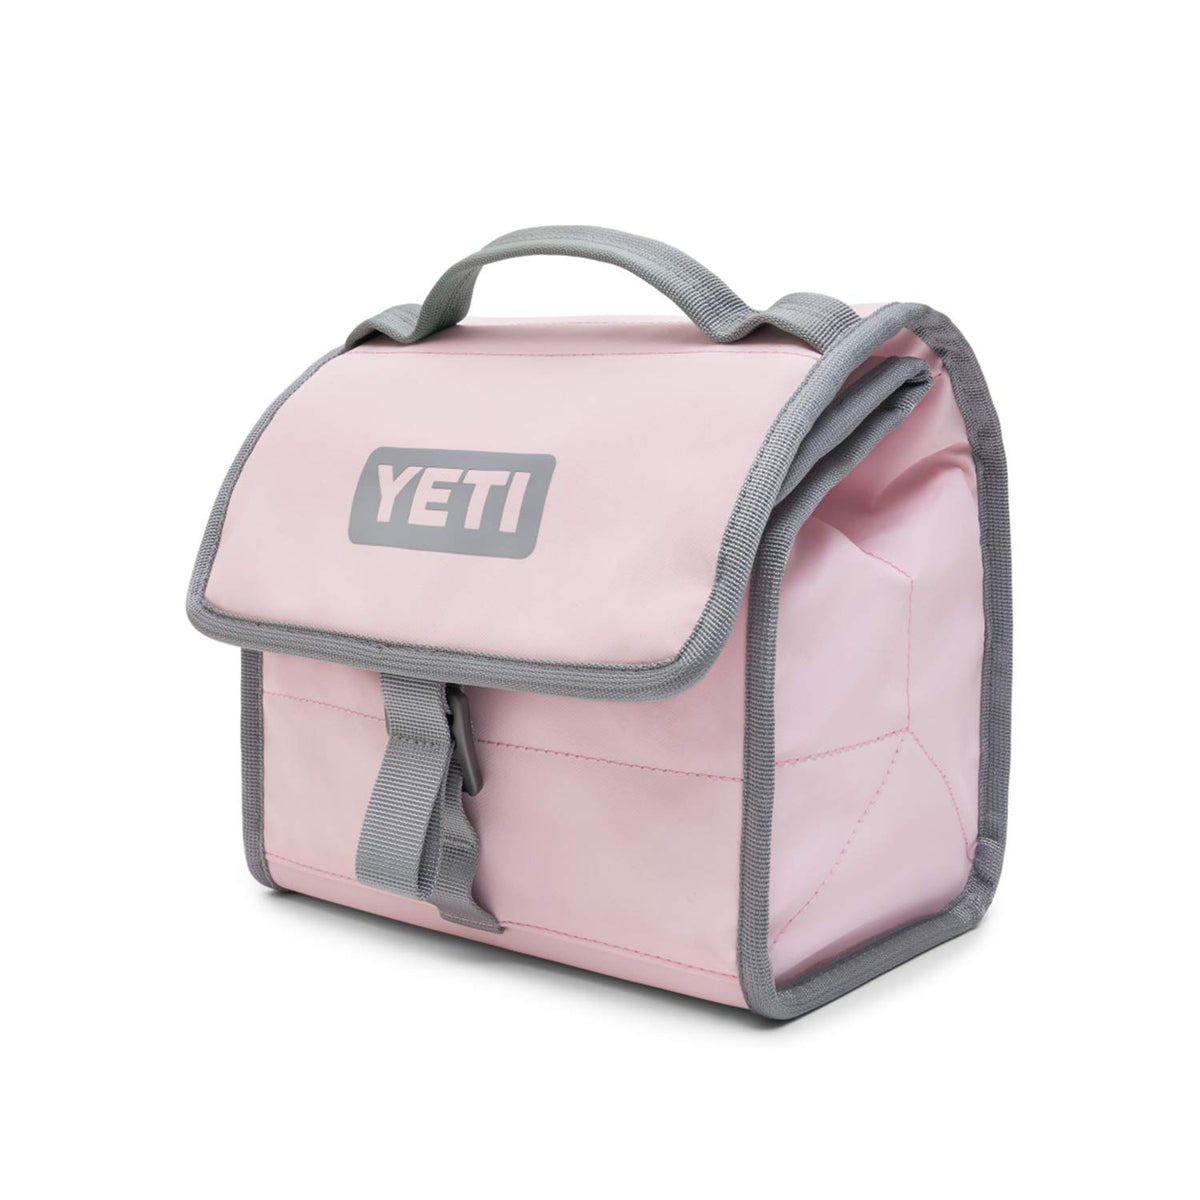 Yeti Daytrip Lunch Box - BEST LUNCH BOX FOR MEN AND WOMEN 